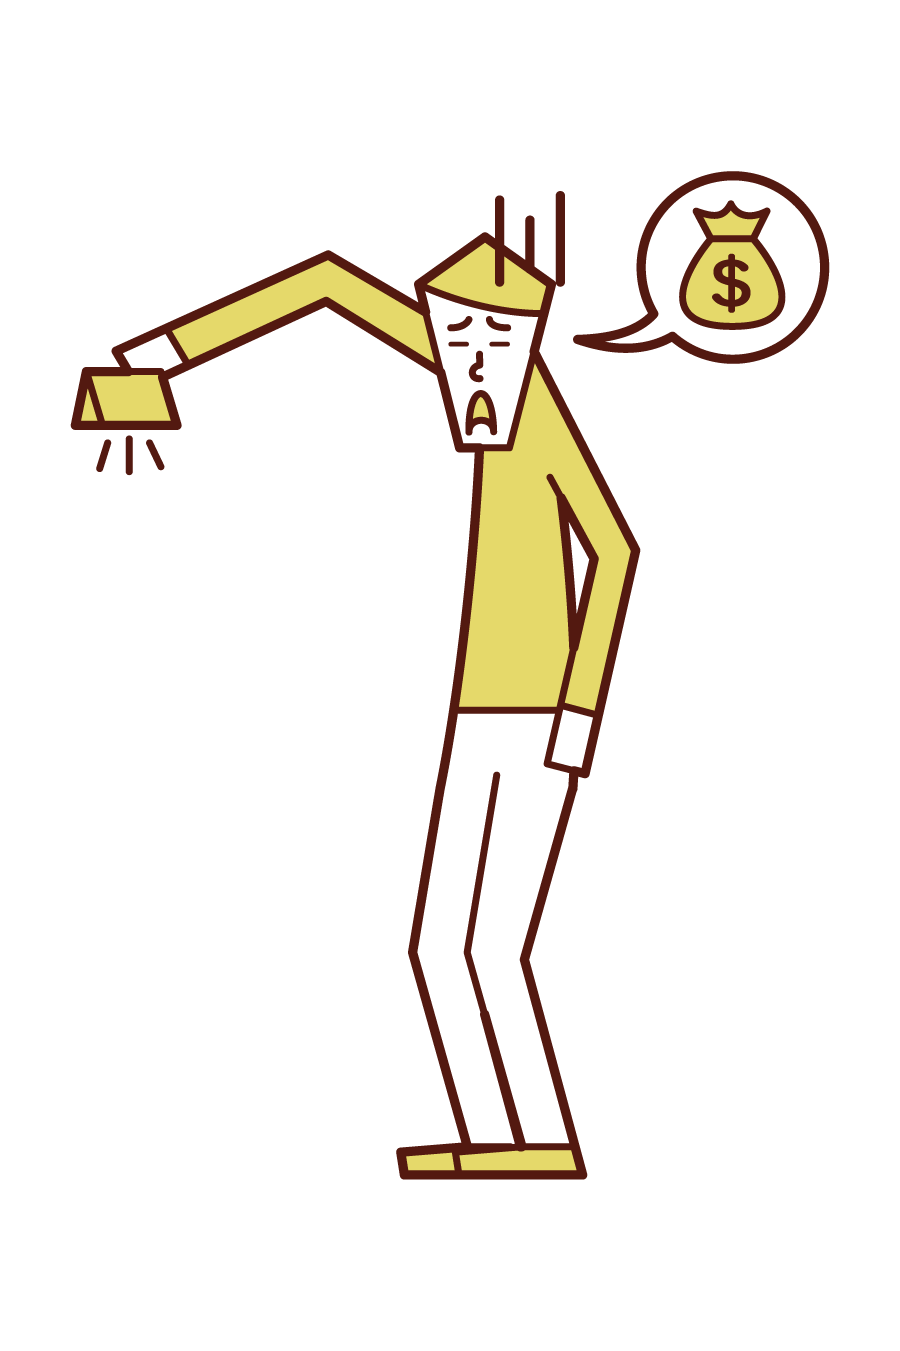 Illustration of a man who is out of money